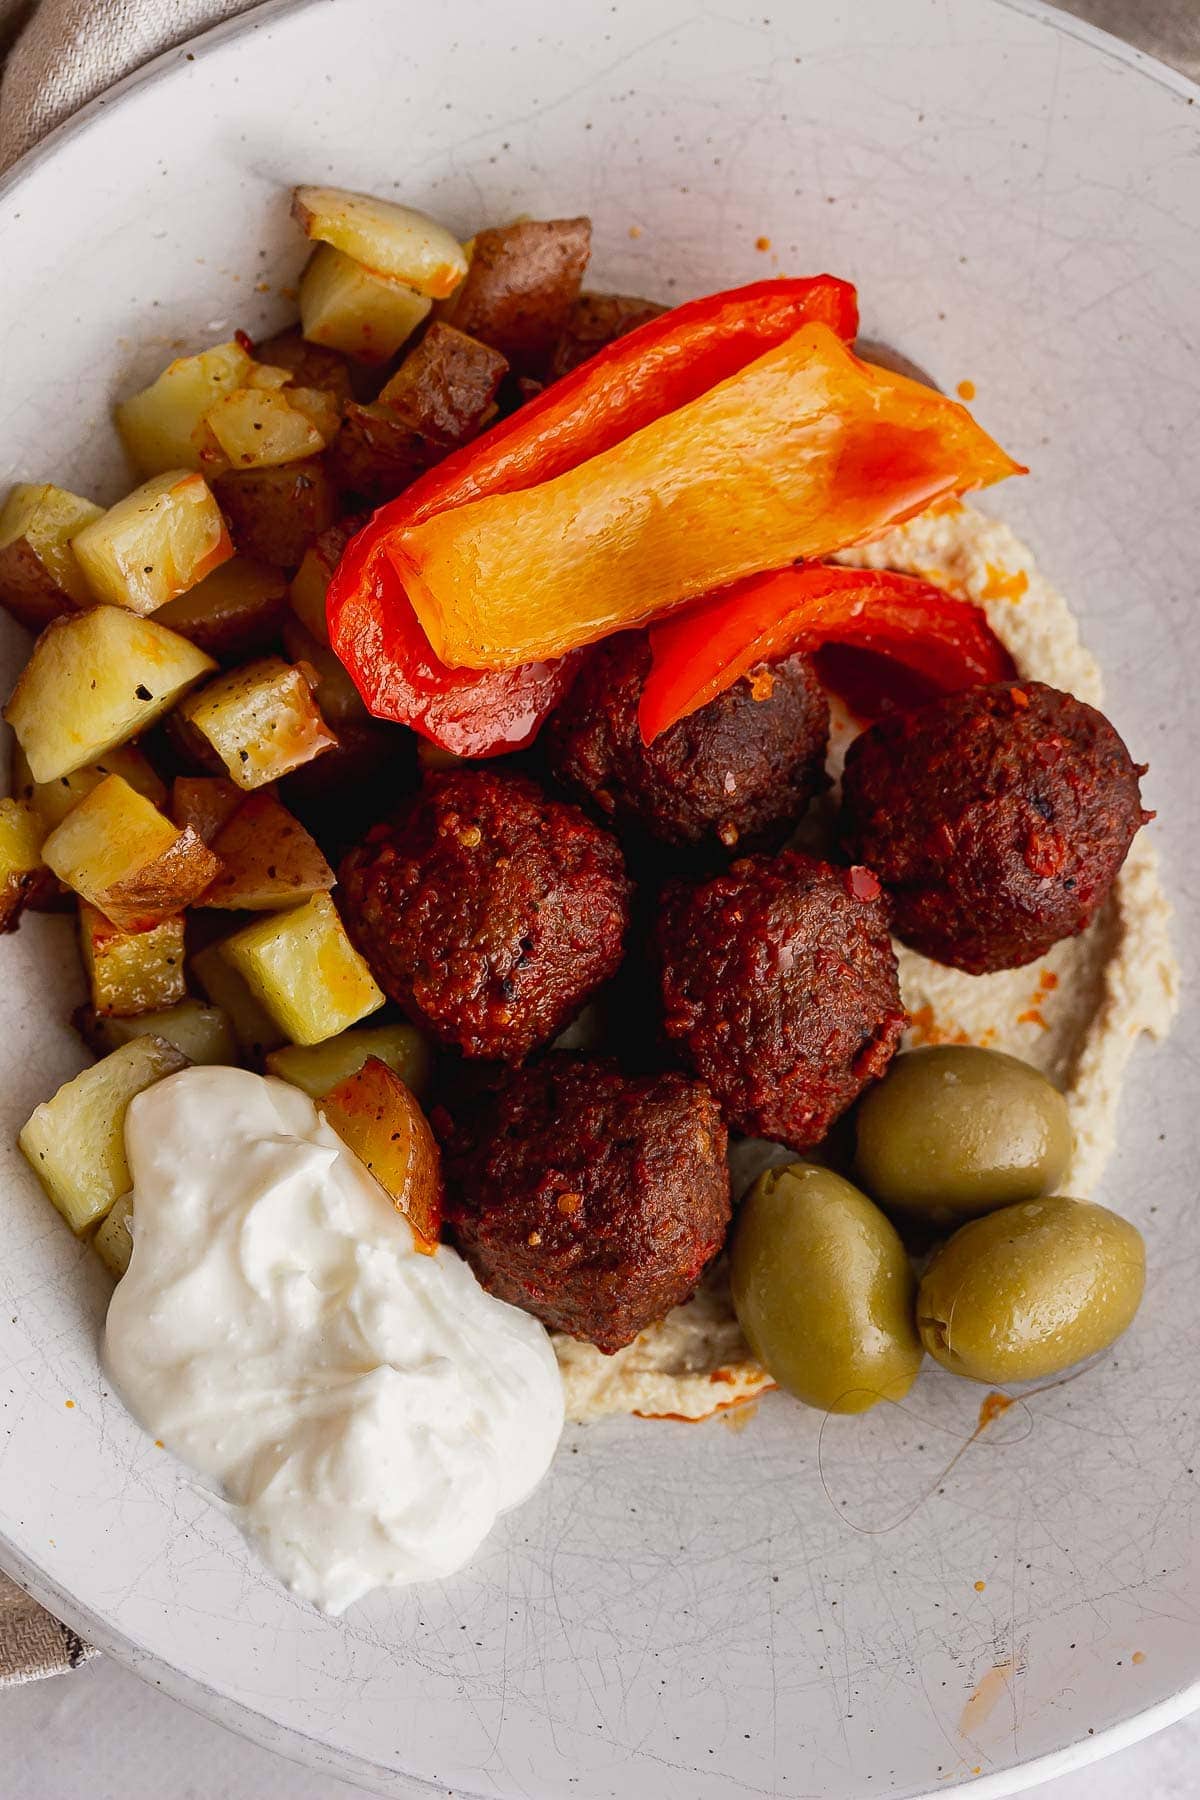 Meatballs and potatoes on a bed of hummus